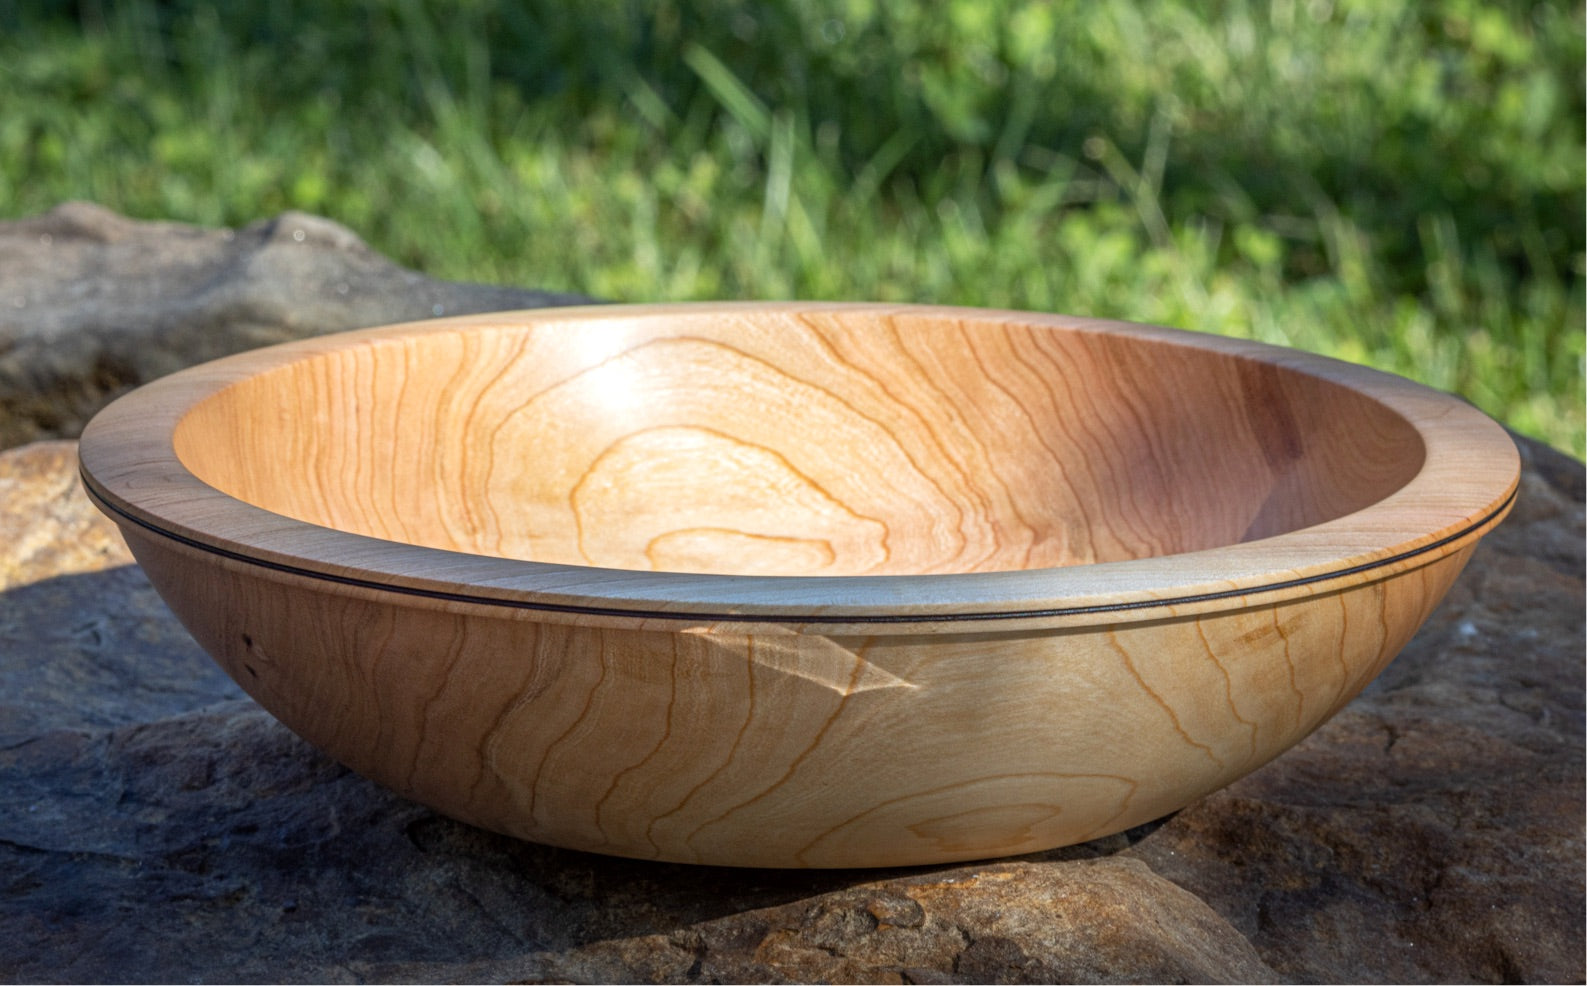 A large handmade wooden bowl made from Black Cherry Wood